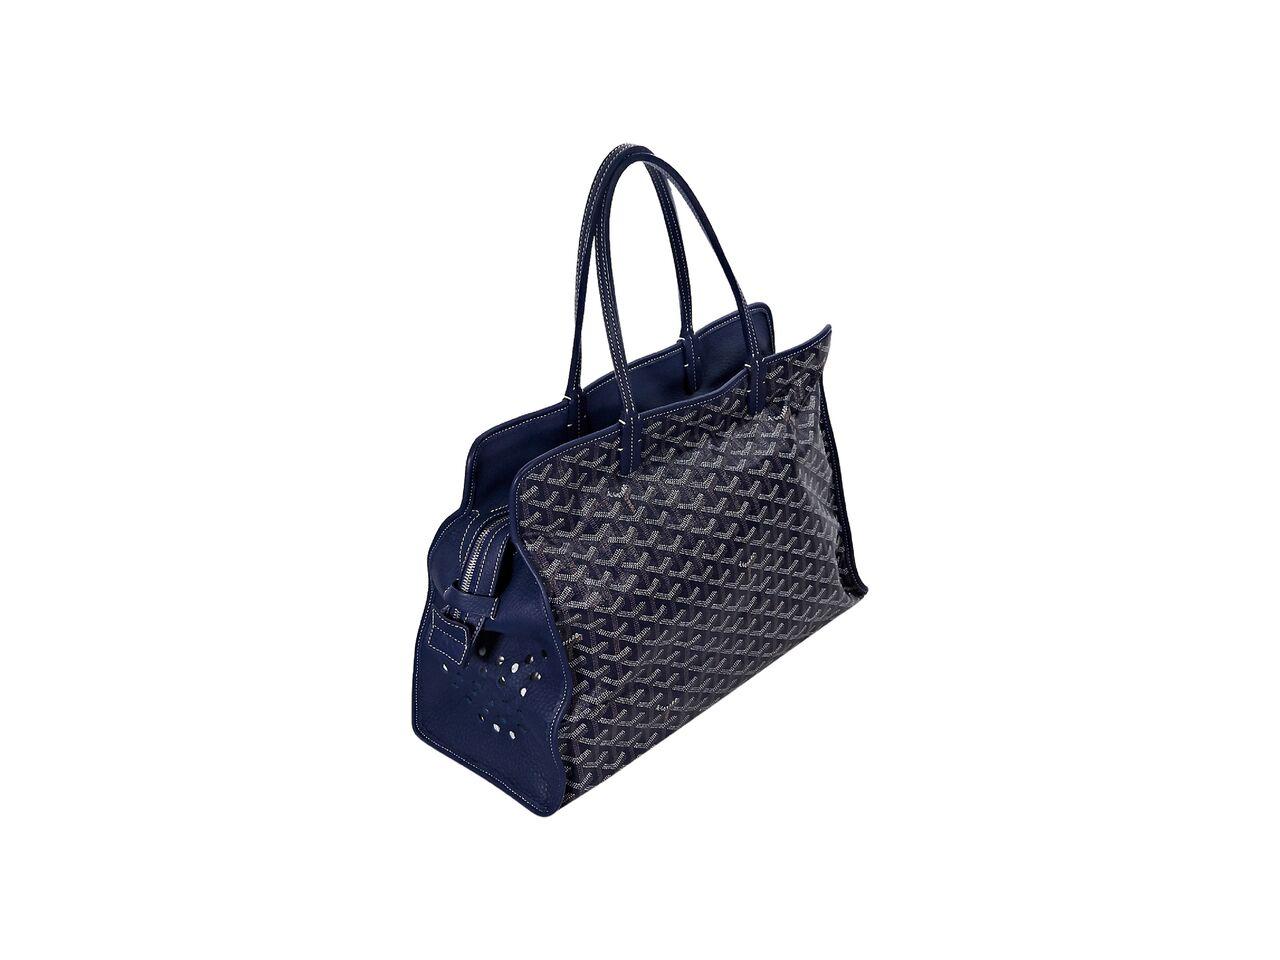 Product details:  Blue Sac Hardy pet carrier PM bag by Goyard.  Trimmed with leather.  Dual shoulder straps.  Top zip closure.  Inner attached snap pouch.  Perforated side panels.  Silvertone hardware.  15.25